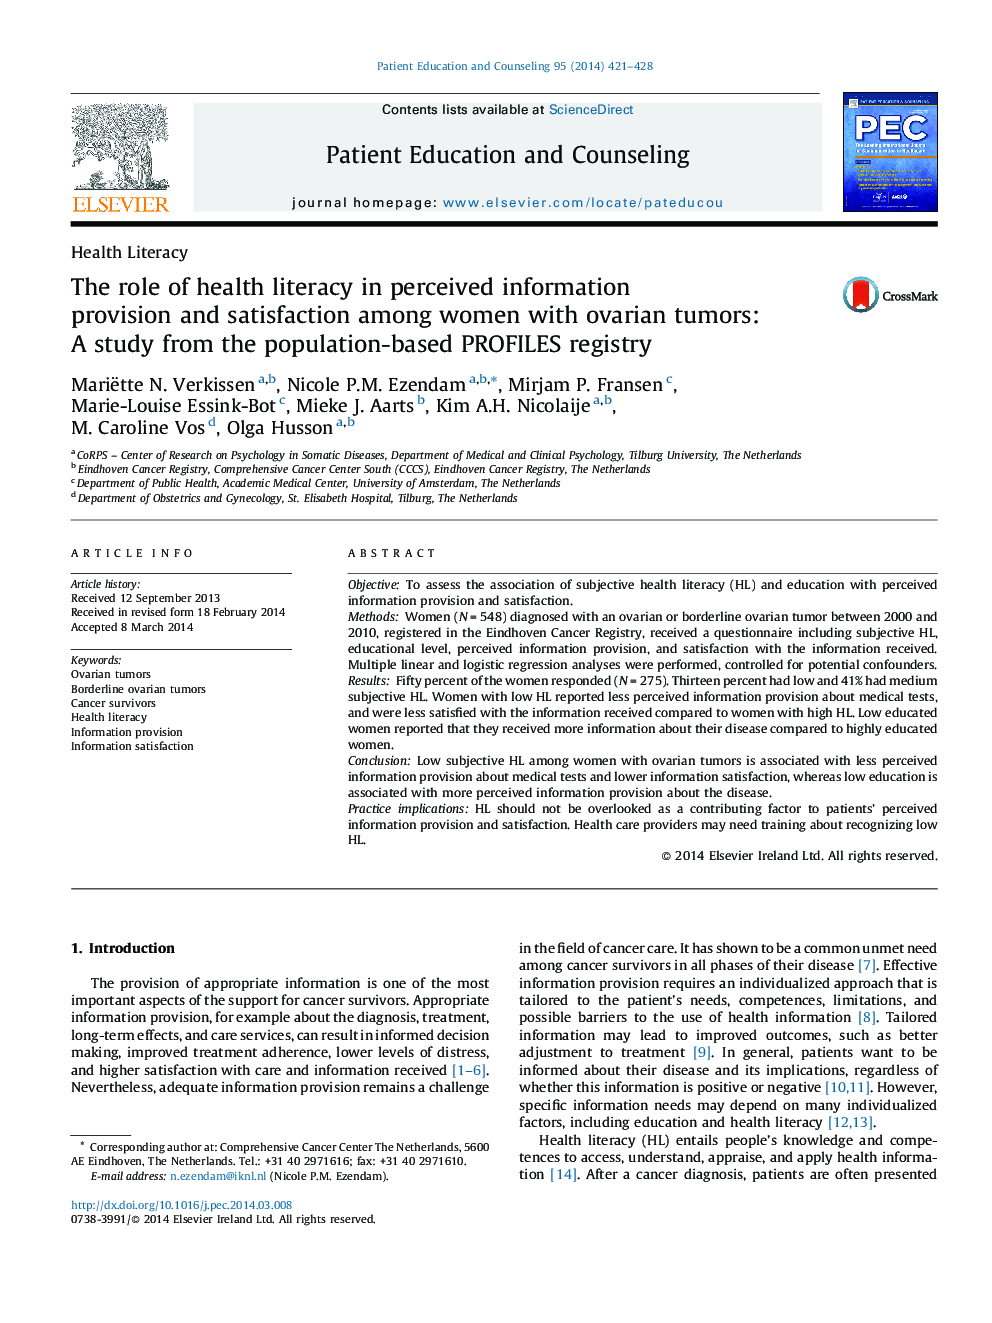 The role of health literacy in perceived information provision and satisfaction among women with ovarian tumors: A study from the population-based PROFILES registry